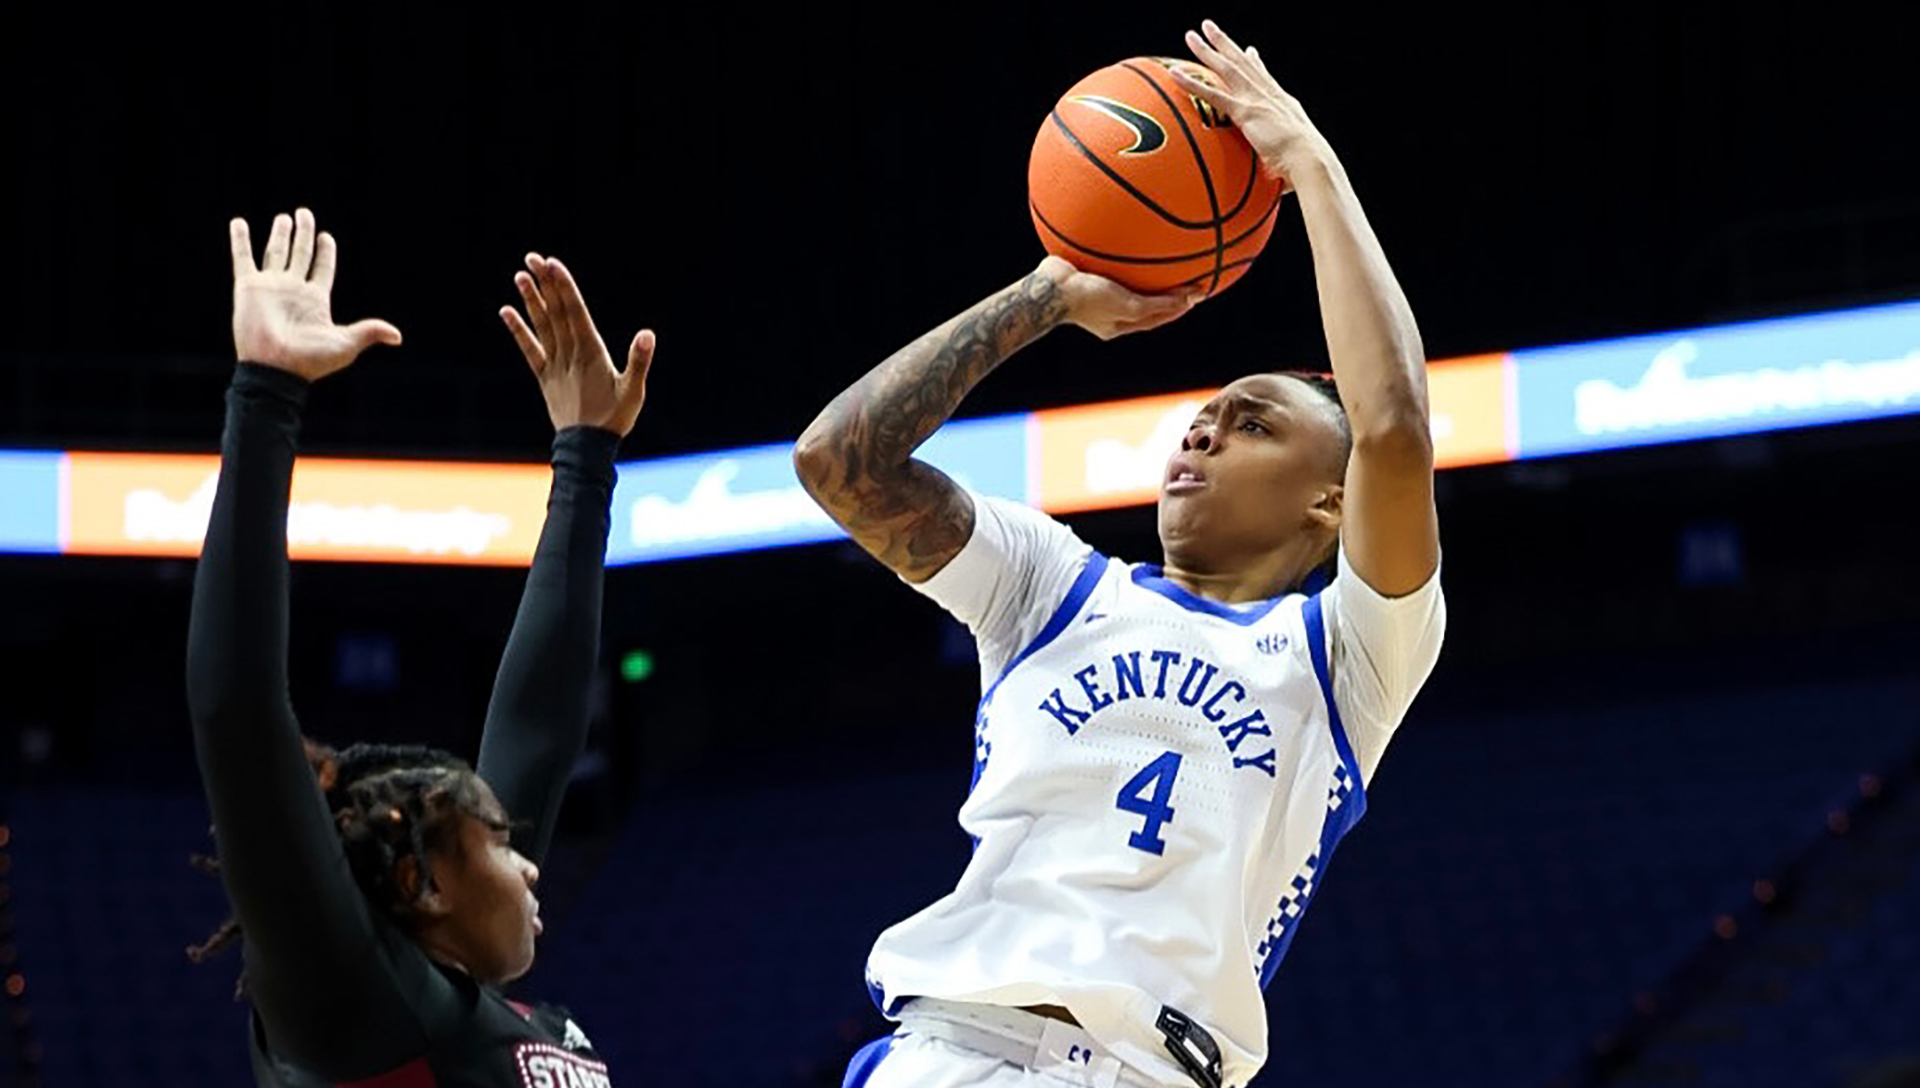 Kentucky-Mississippi State Women's Basketball Postgame Quotes